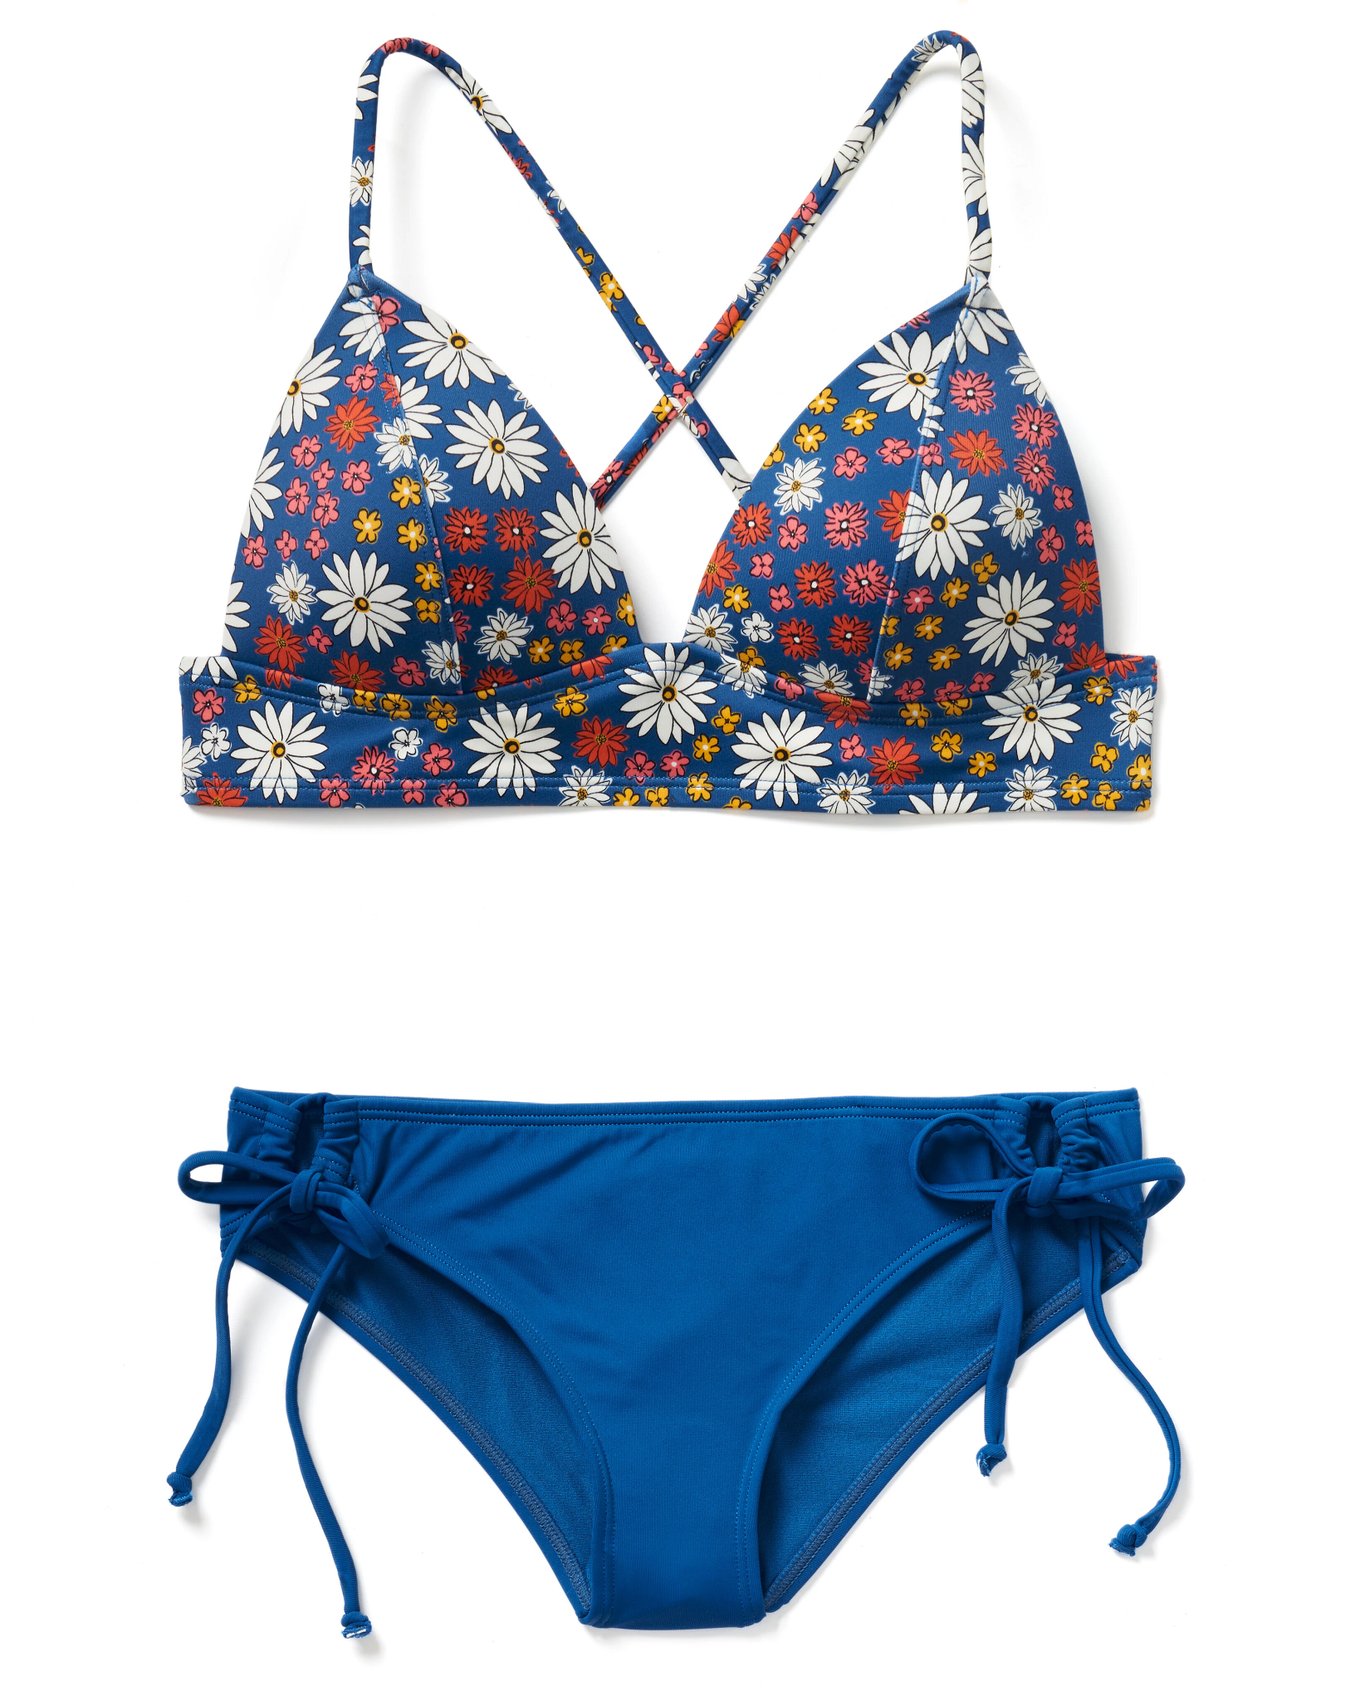 My Favourite Swimwear Brands 2022  Londre, Knix, Baiia, Cupshe, and more!  